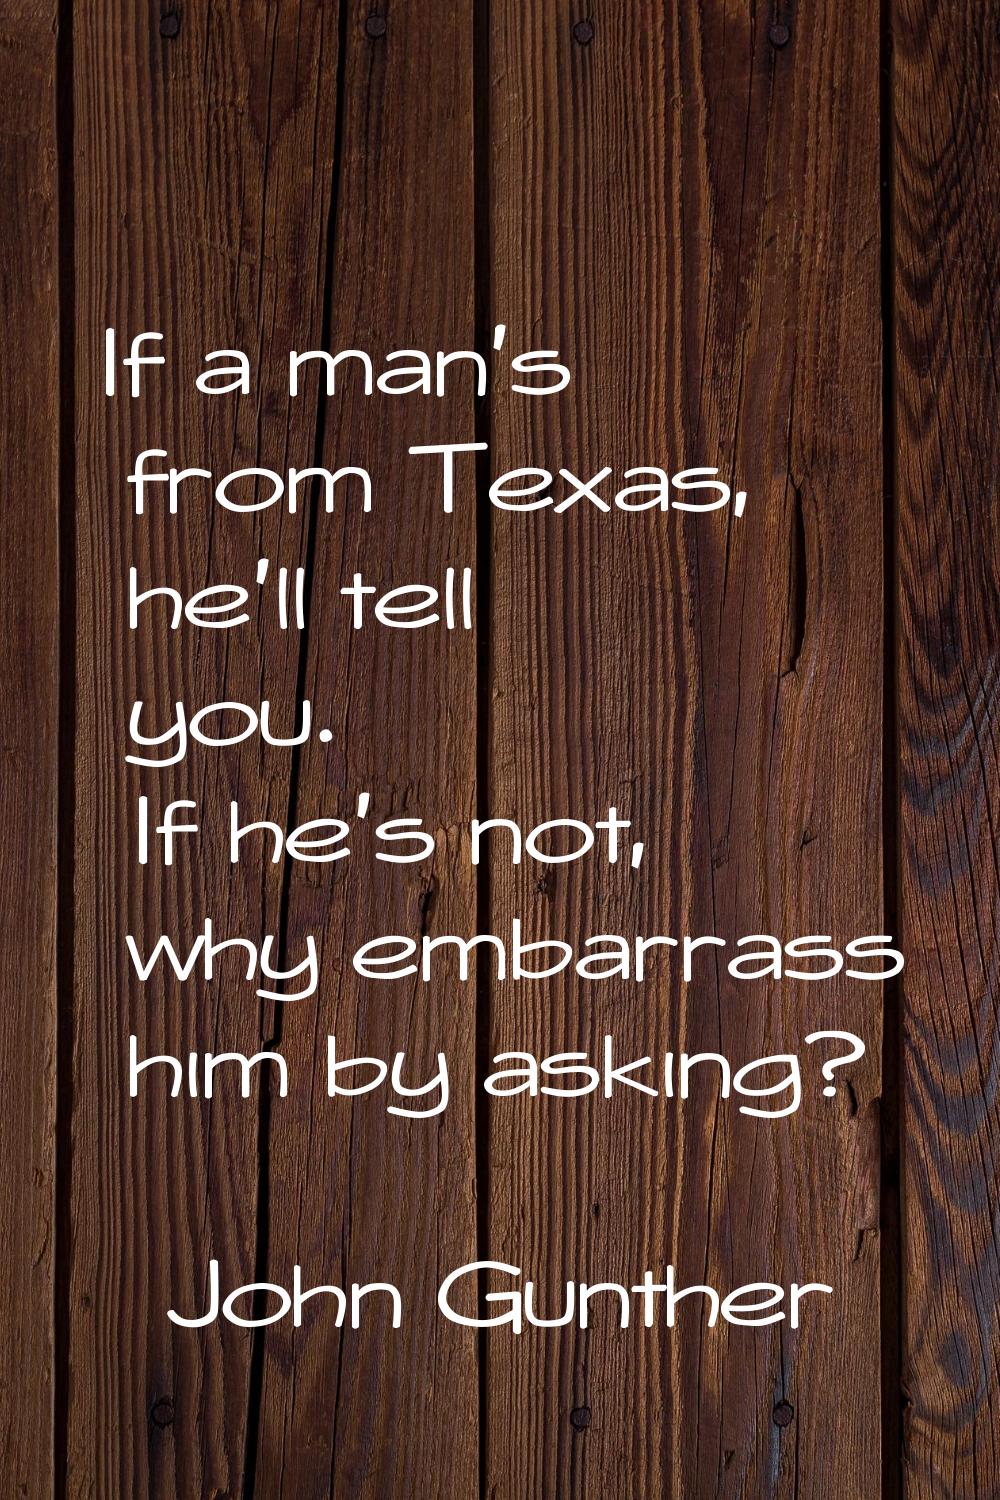 If a man's from Texas, he'll tell you. If he's not, why embarrass him by asking?